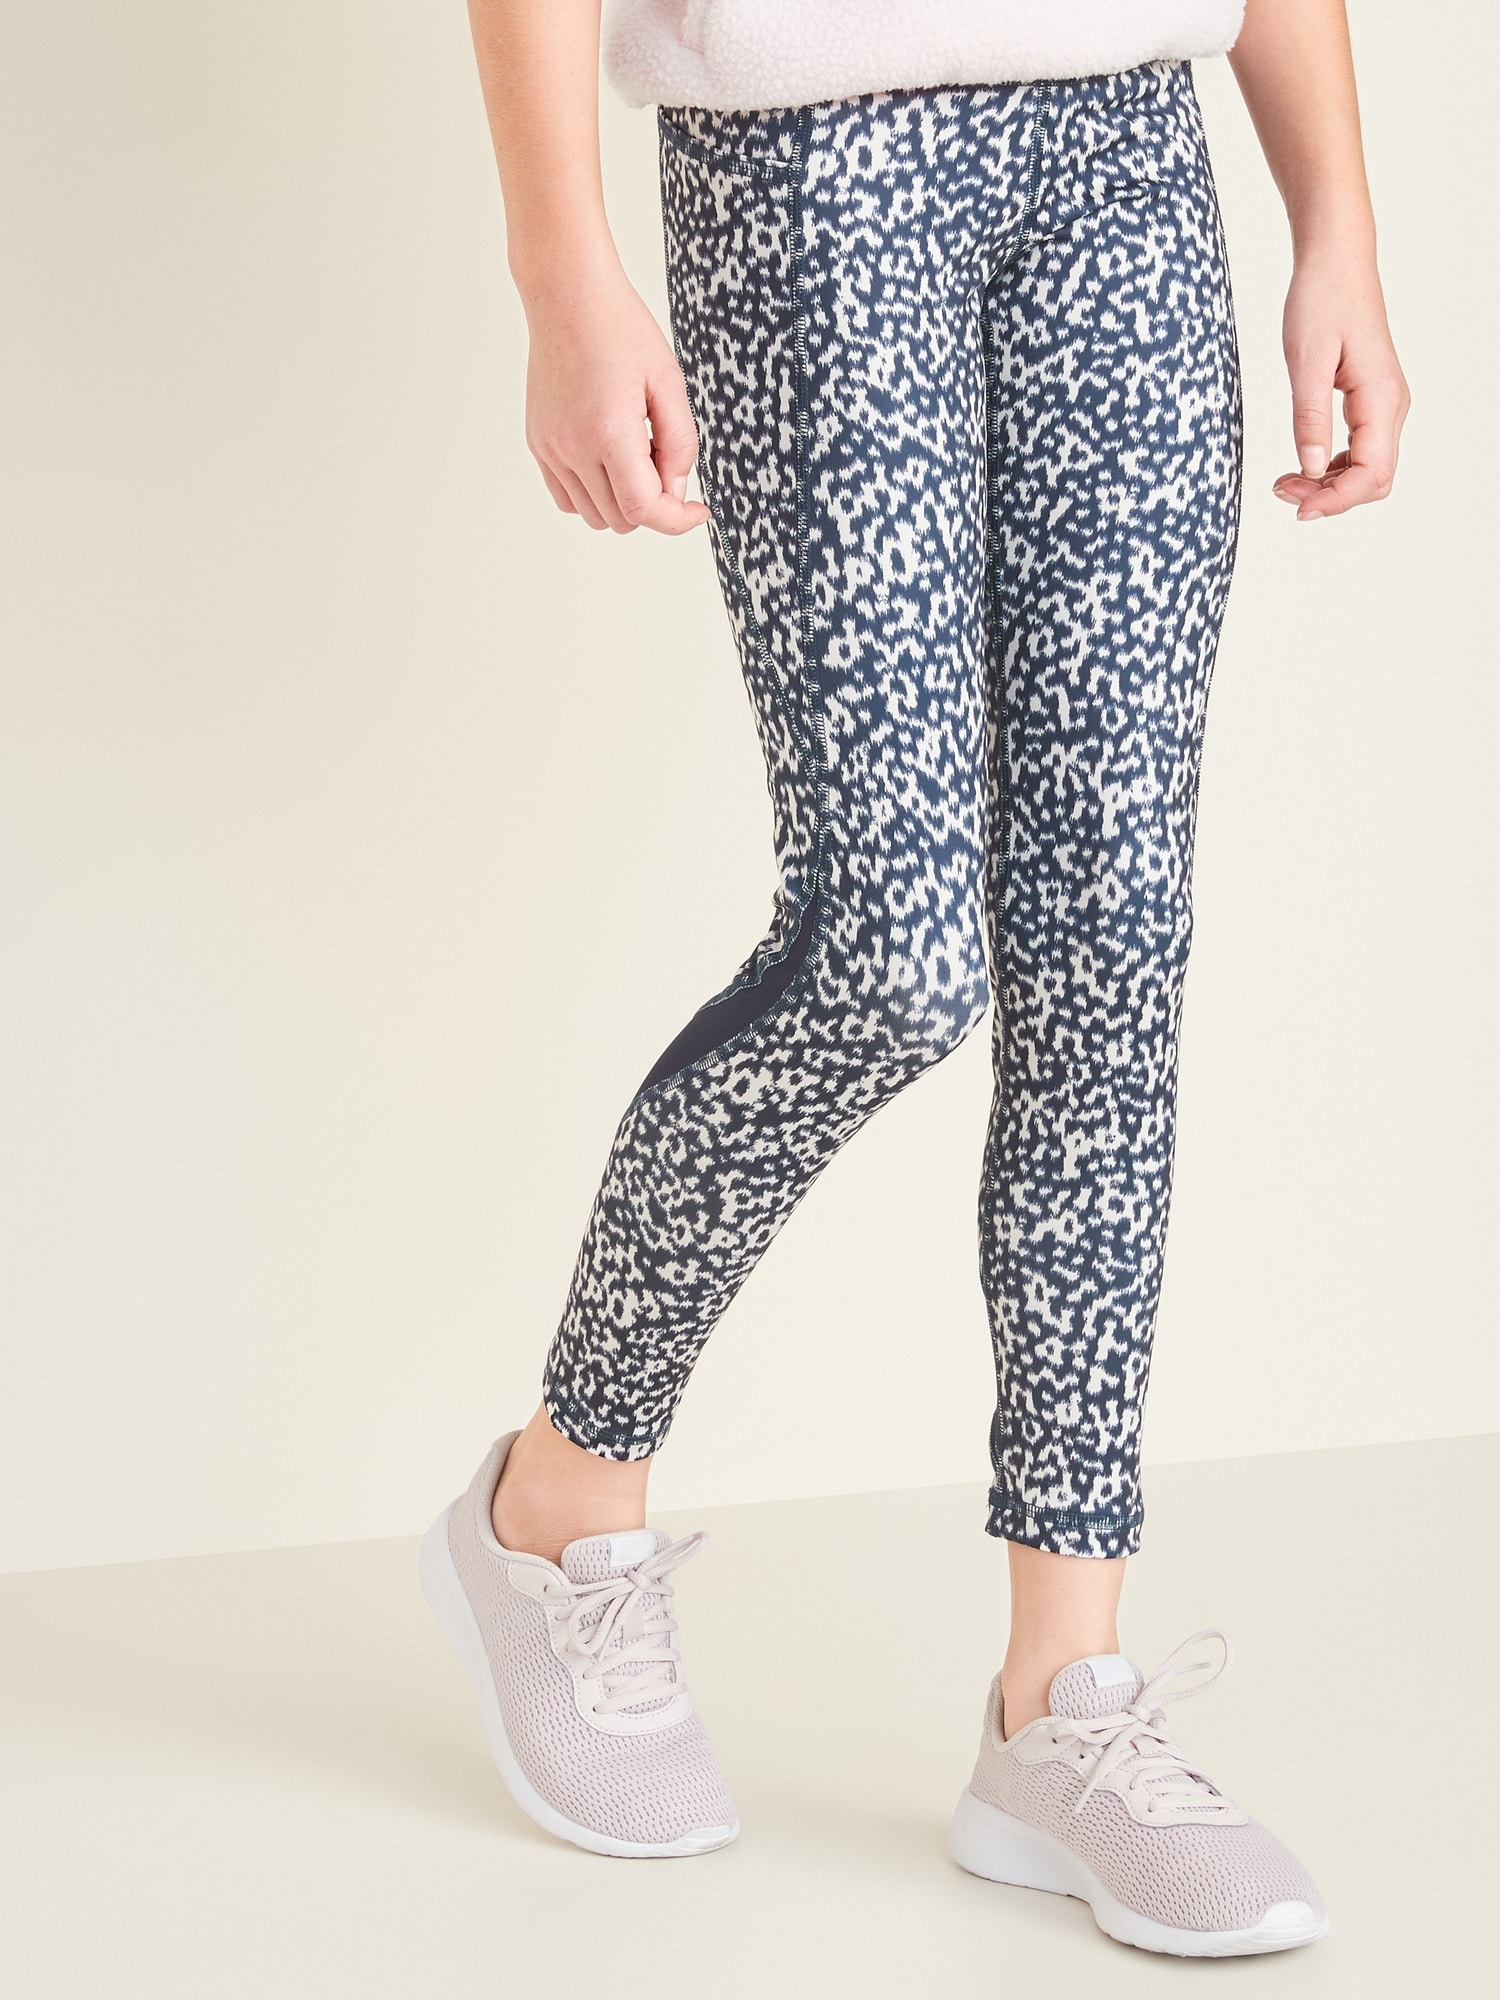 Old Navy Active Go Dry Blue With Leaves Design Elevate Leggings Women's L